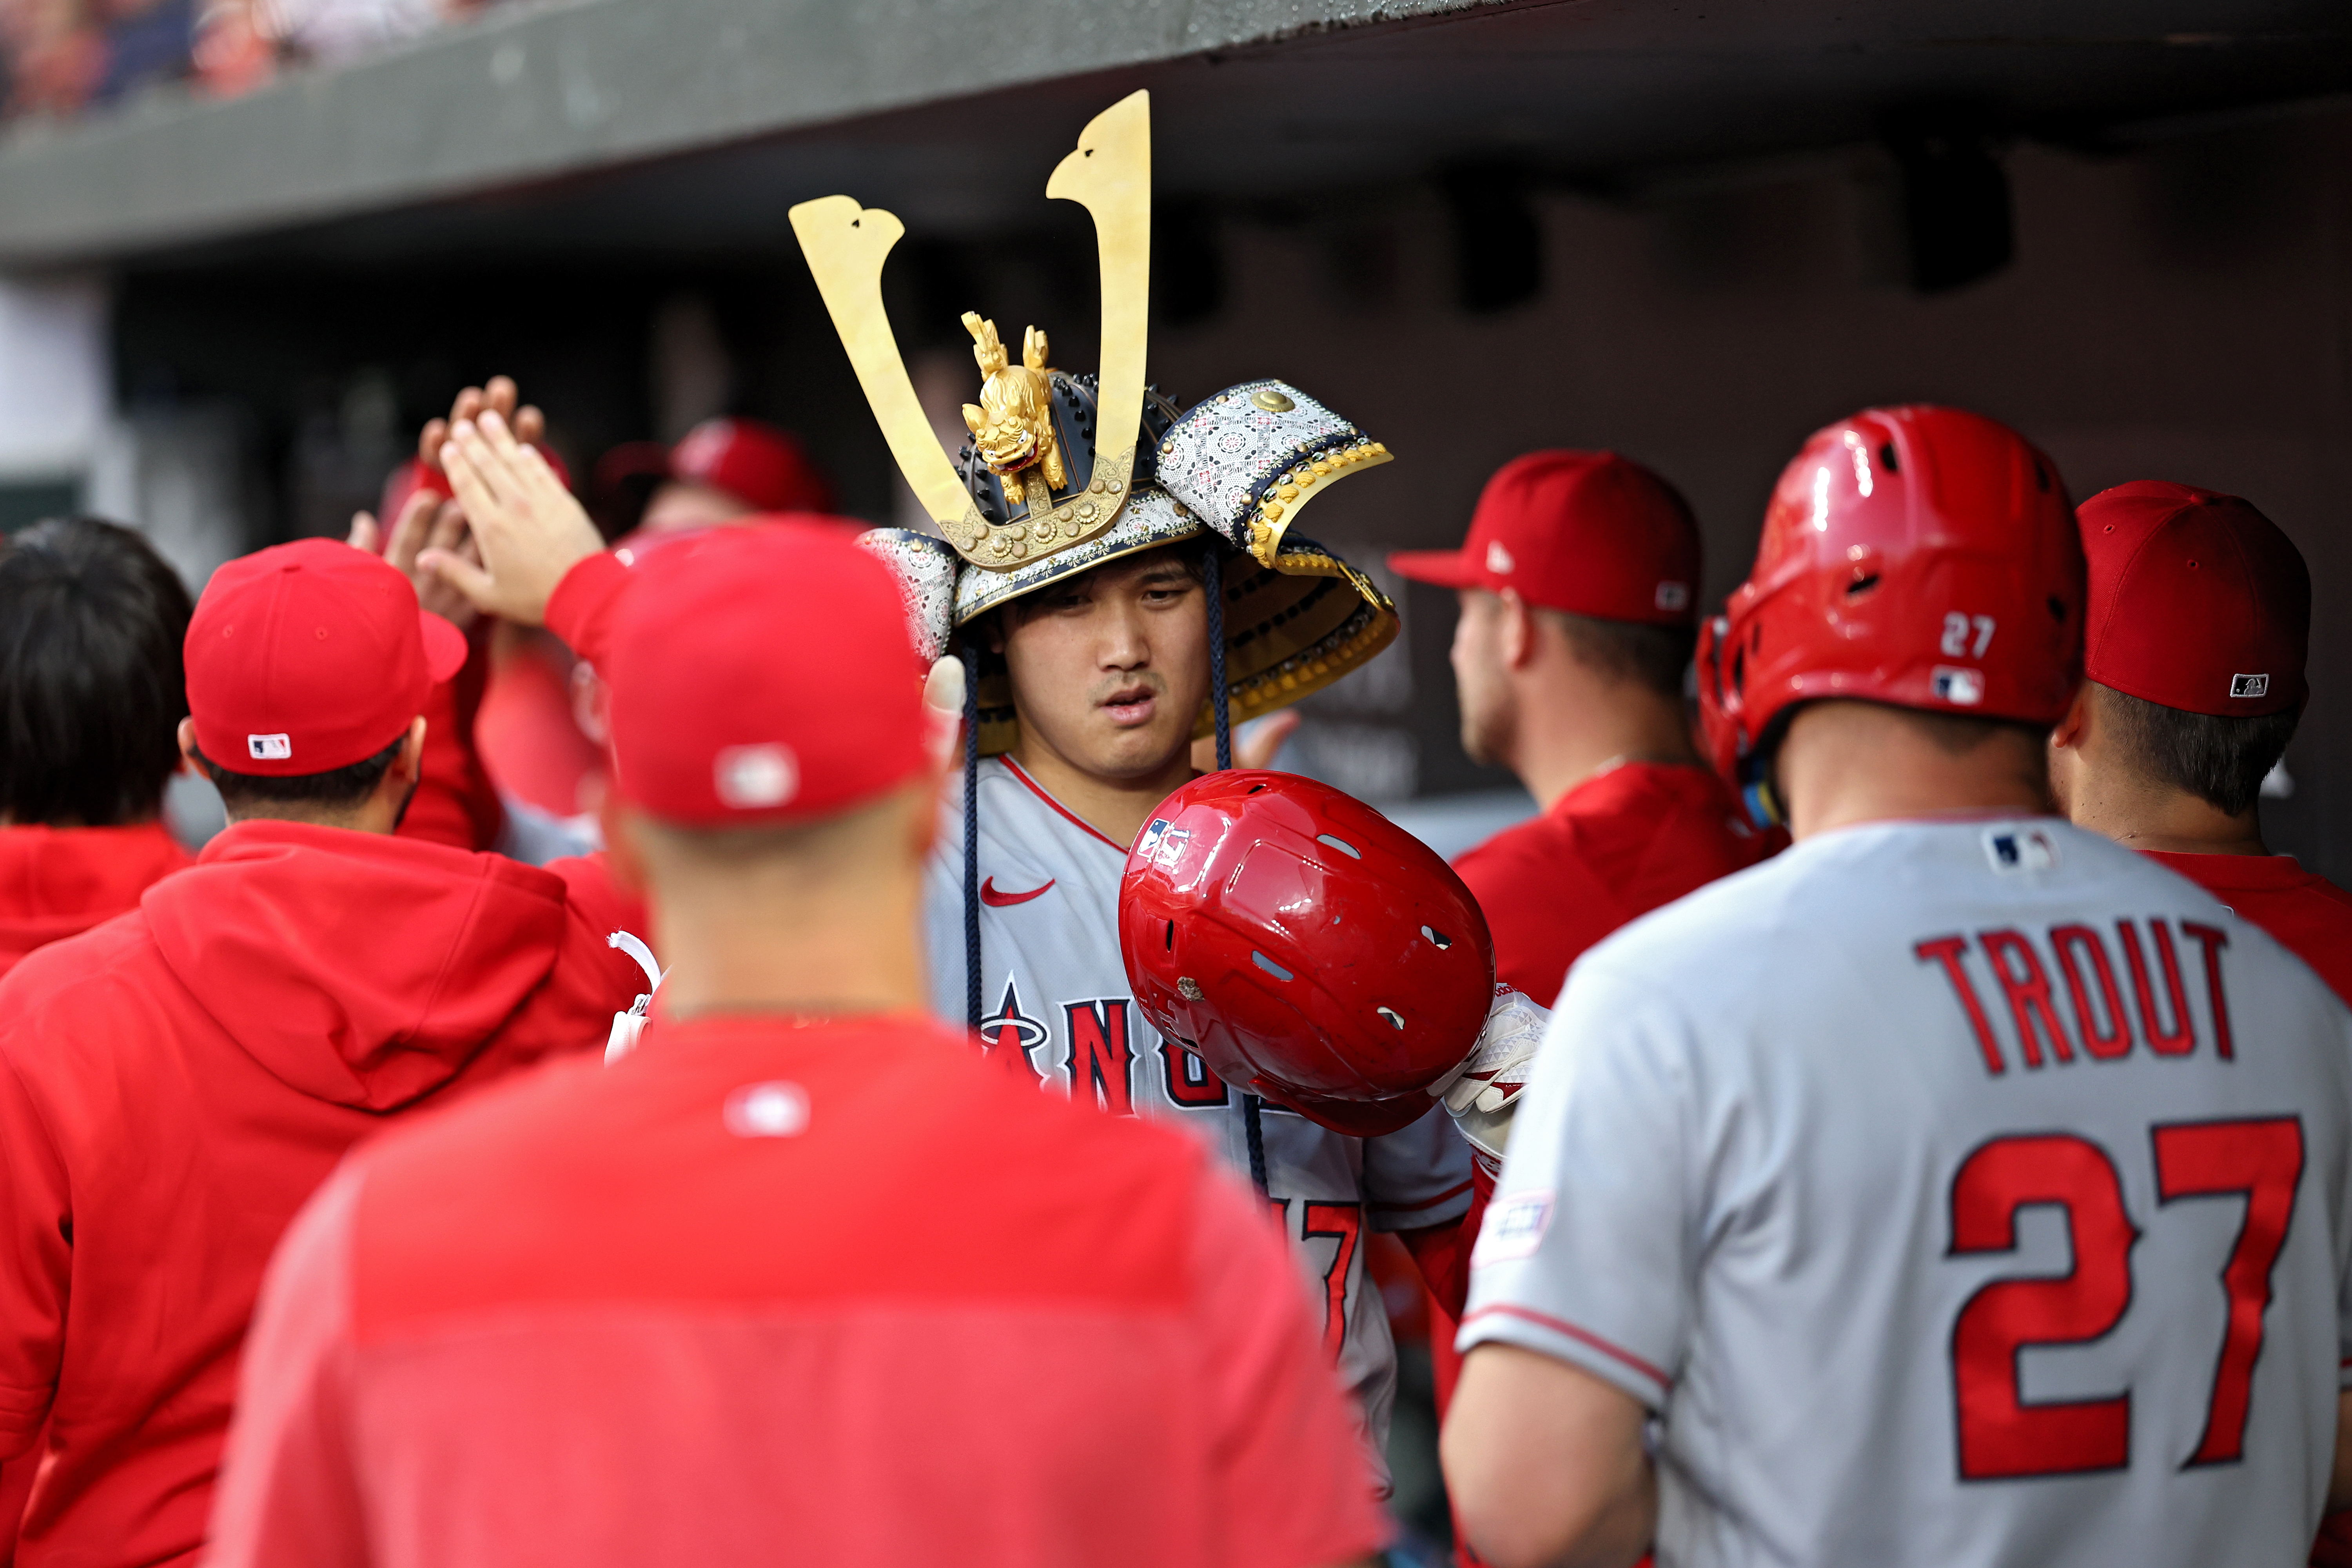 Shohei Ohtani pitches 7 innings, reaches base 5 times as Angels beat  Orioles 9-5